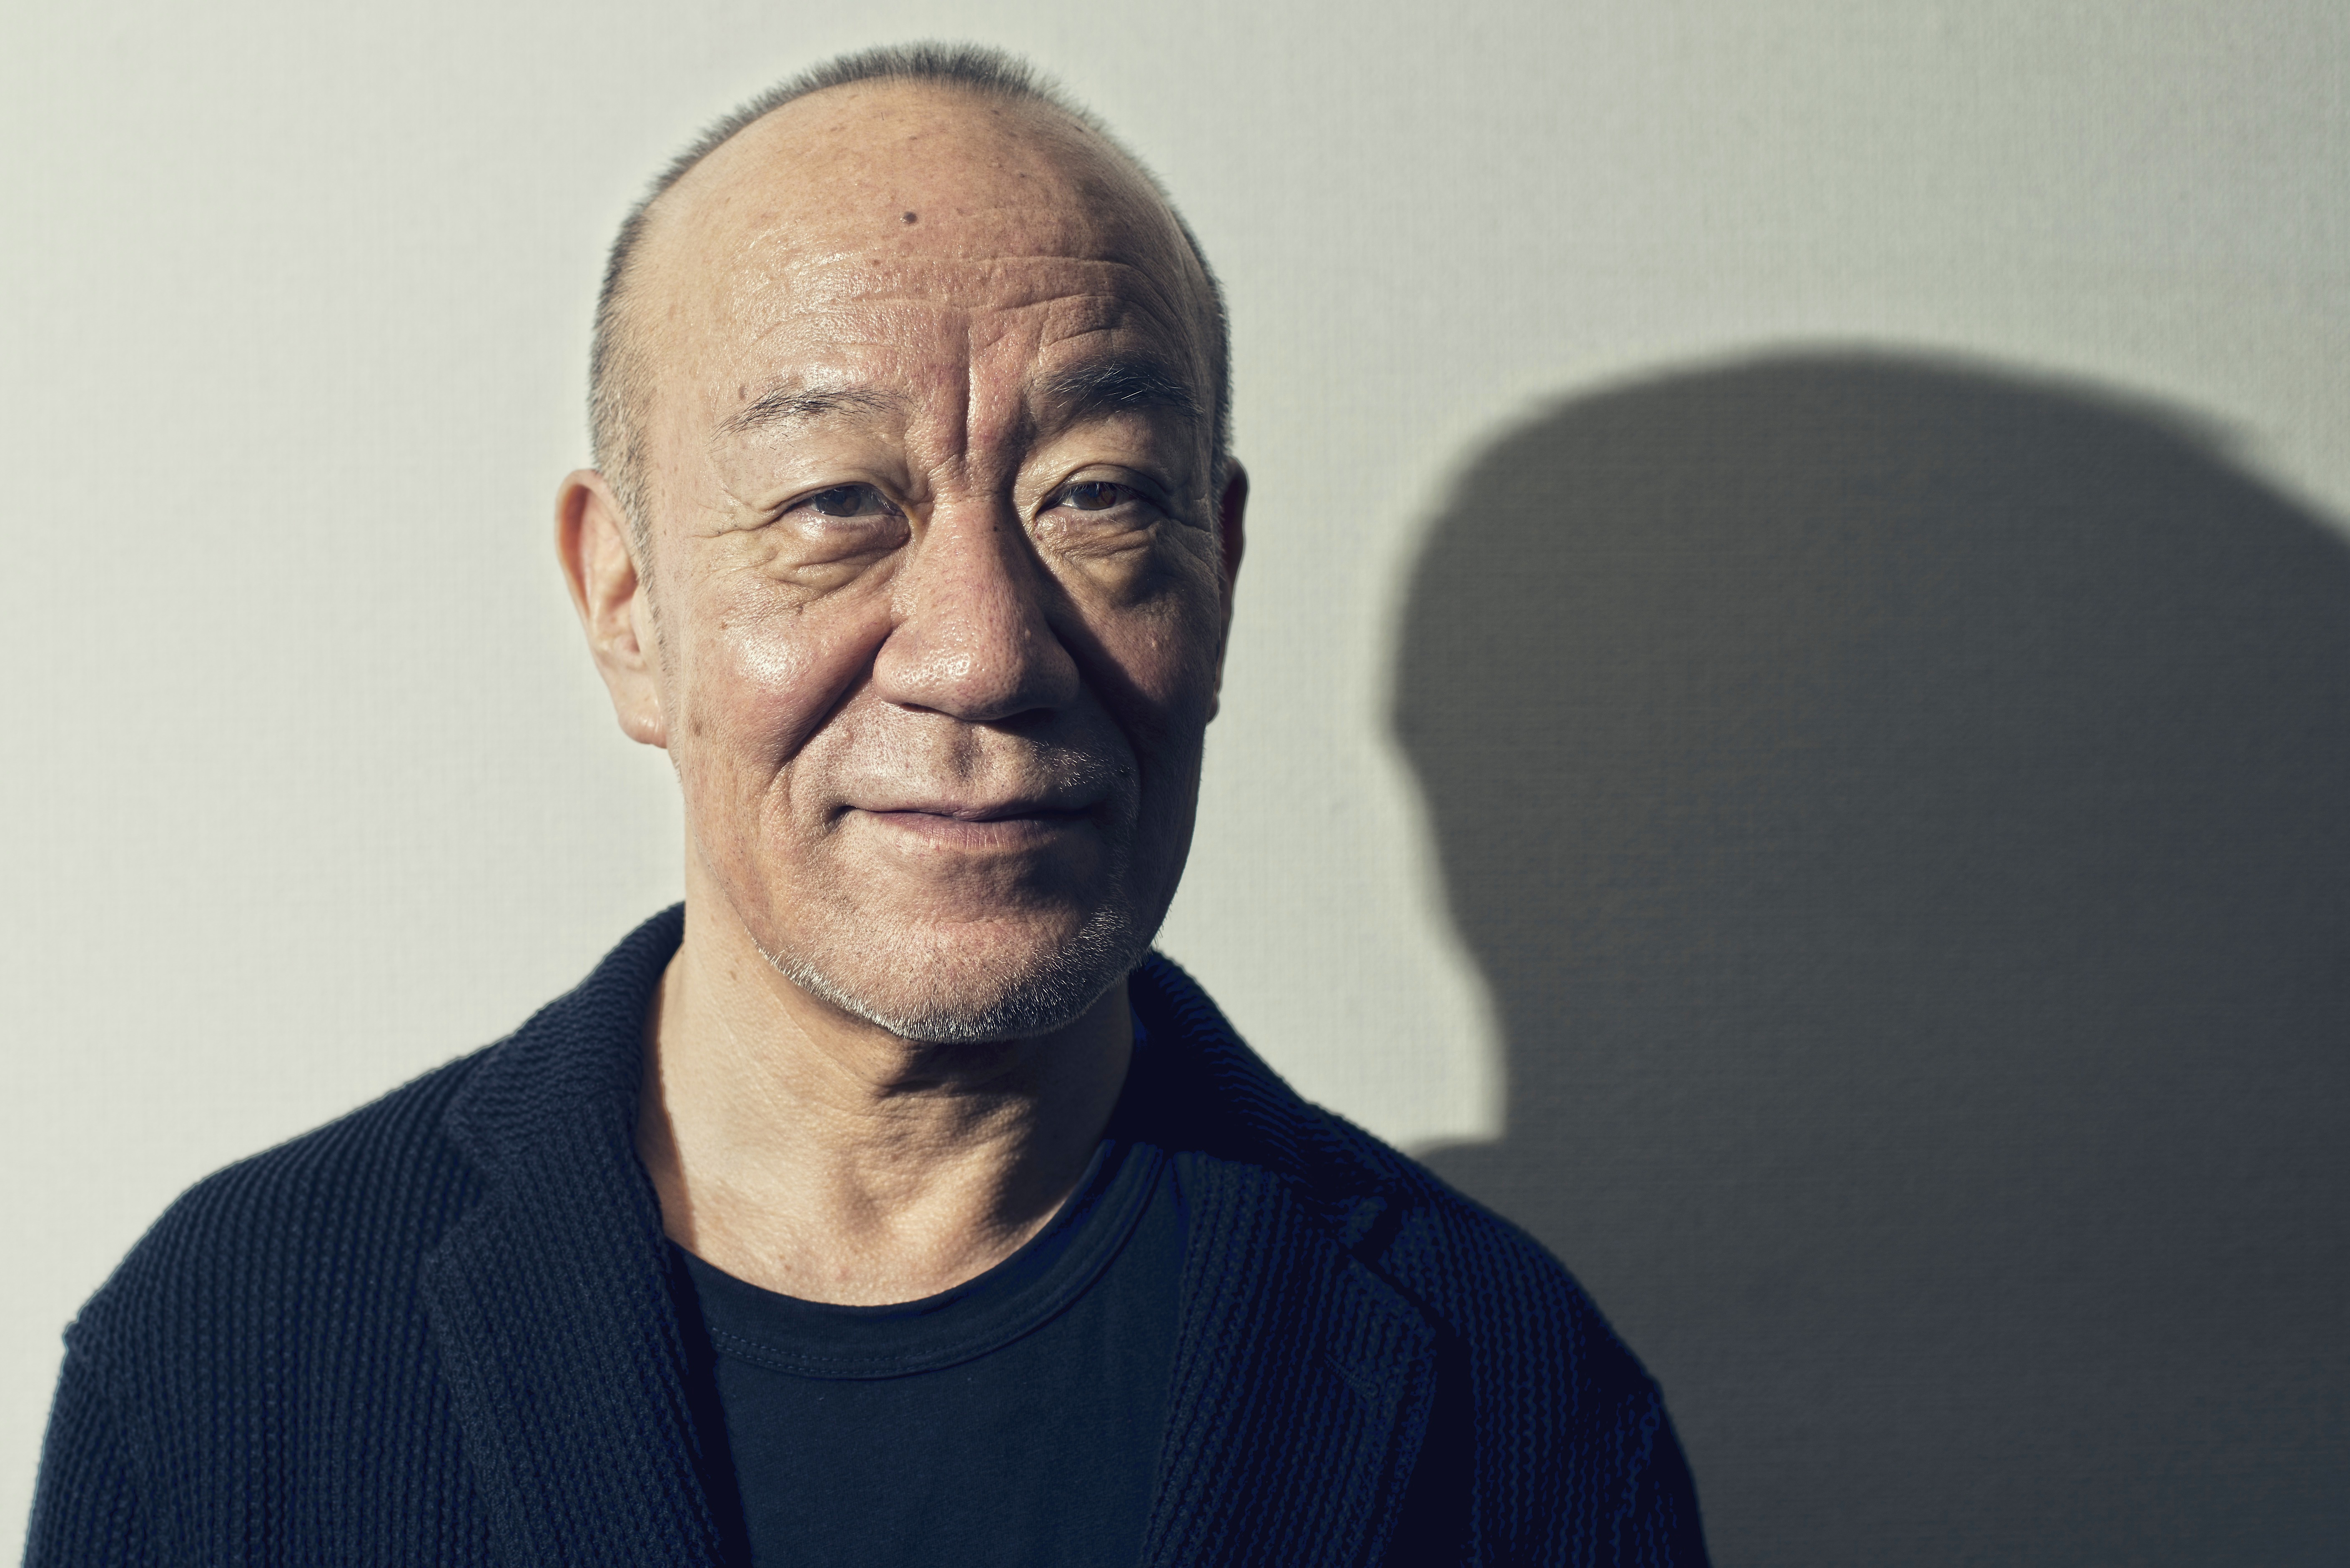 Composer Joe Hisaishi opens up to streaming - The Japan Times